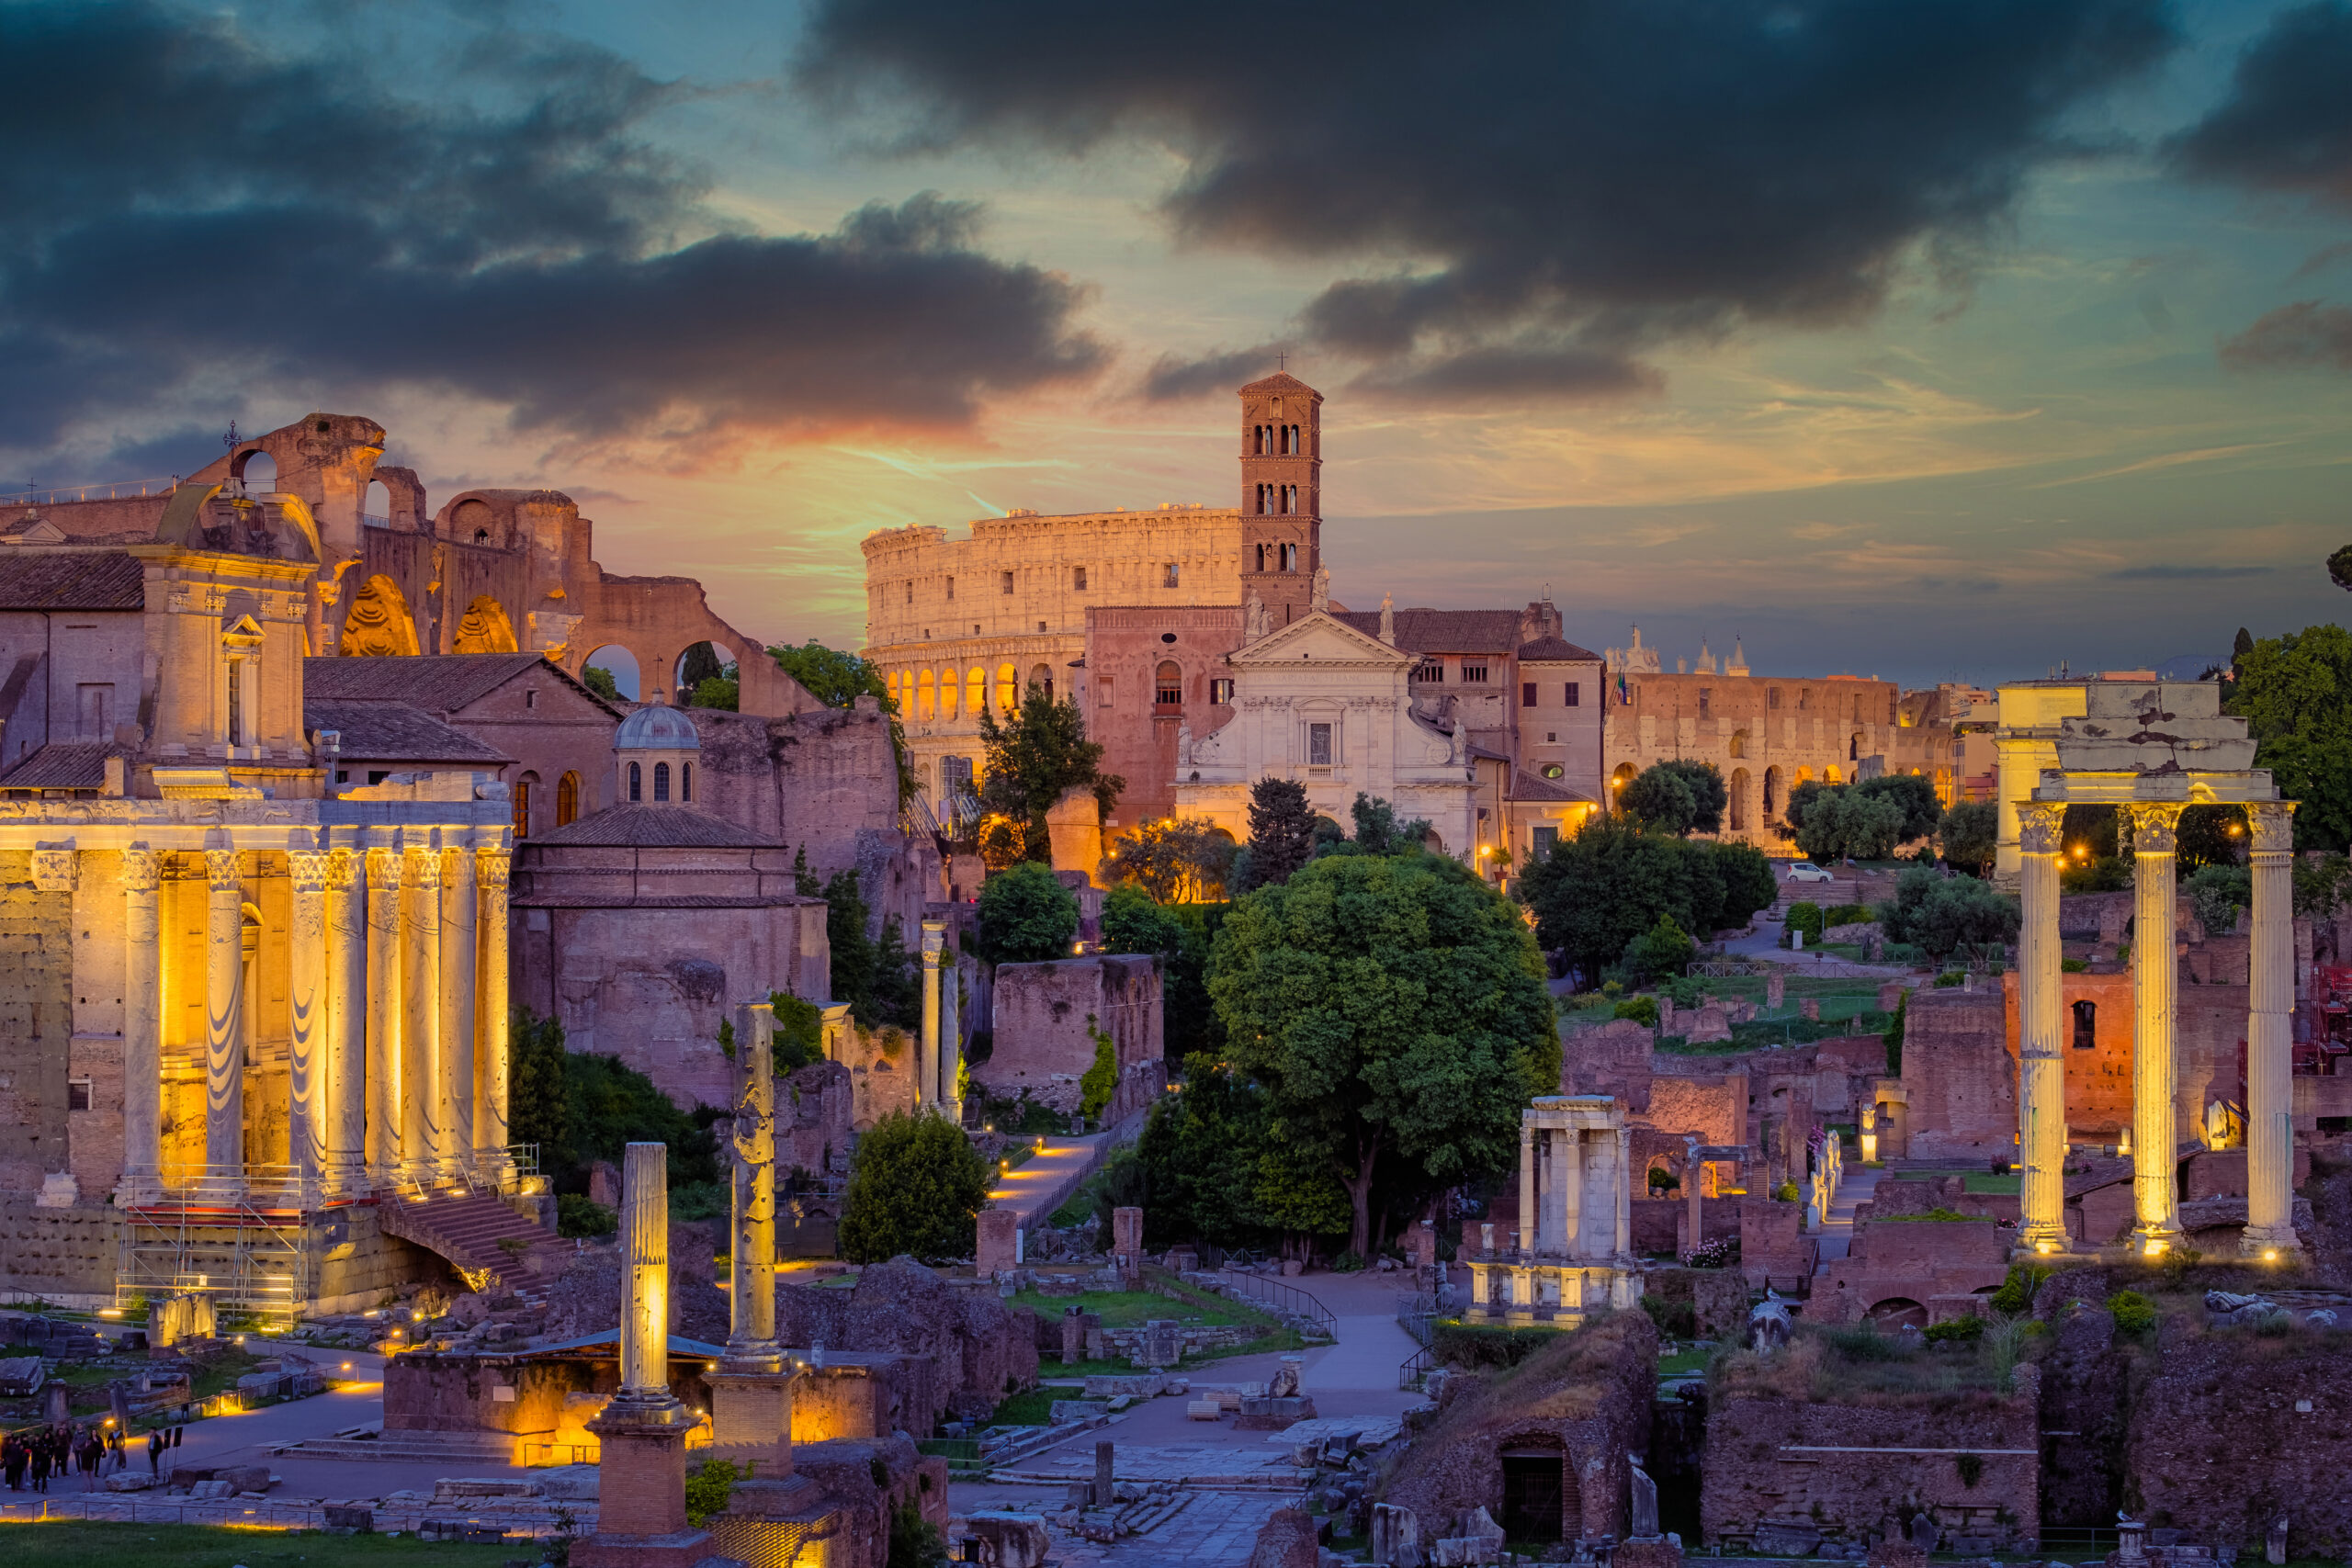 Forum Romanum and Colosseum in Rome with dramatic colorful sky, Italy